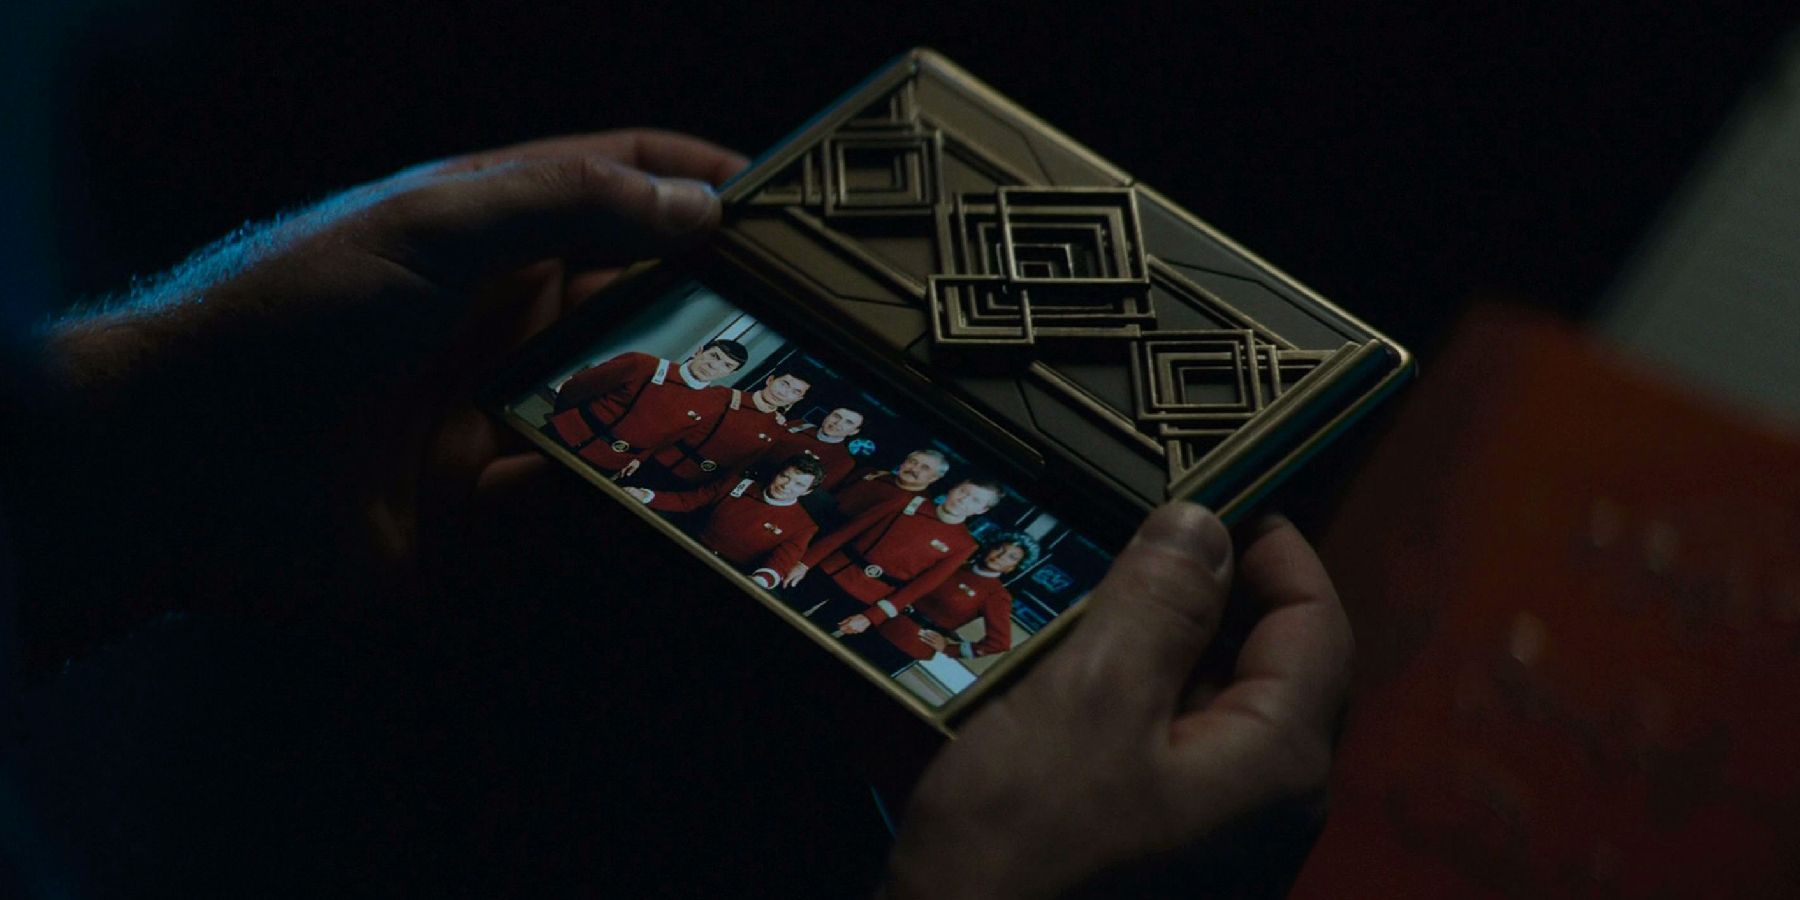 Spock looks at the photo of the older TOS crew in Star Trek Beyond